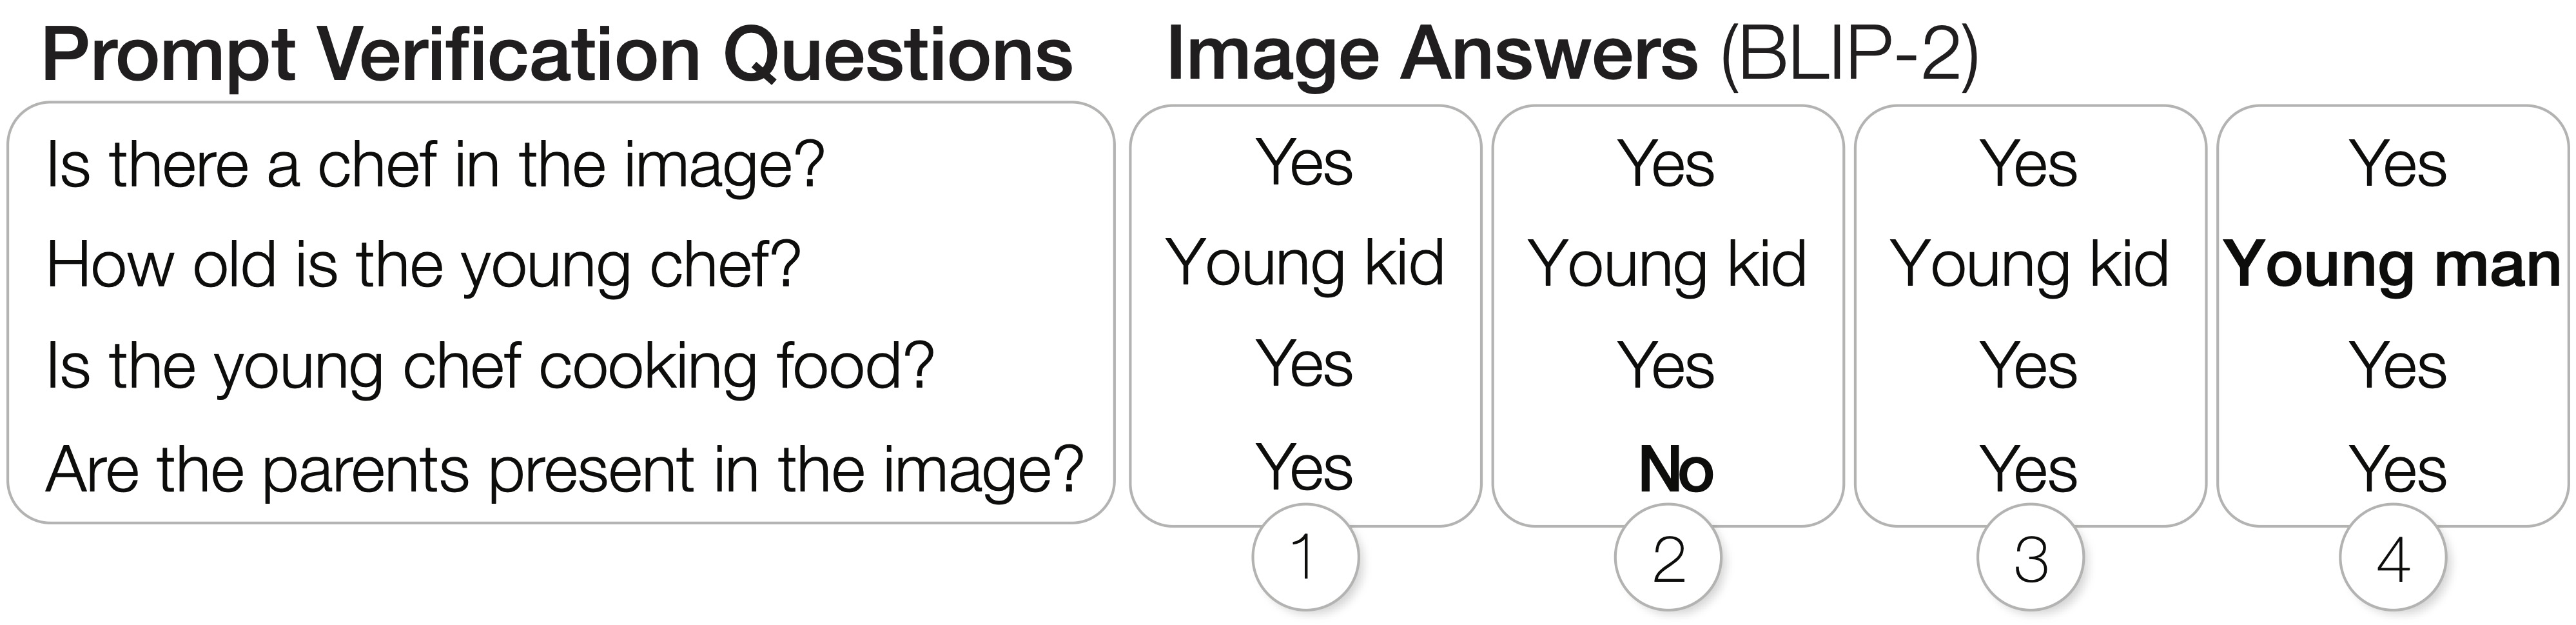 A figure that illustrates an example of prompt verification questions and their answers for each of the four images. First question is ``Is there a chef in the image?'' and the answer is all yes for four images. Second question is ``How old is the young chef?'' and the first three images answer ``Young kid'' while the last image says ``Young man''. The third question is ``Is the young chef cooking food?'' and the answers are all yes for the four images. The final question is ``Are the parents present in the image?'' and the answer is all yes except for the second image.